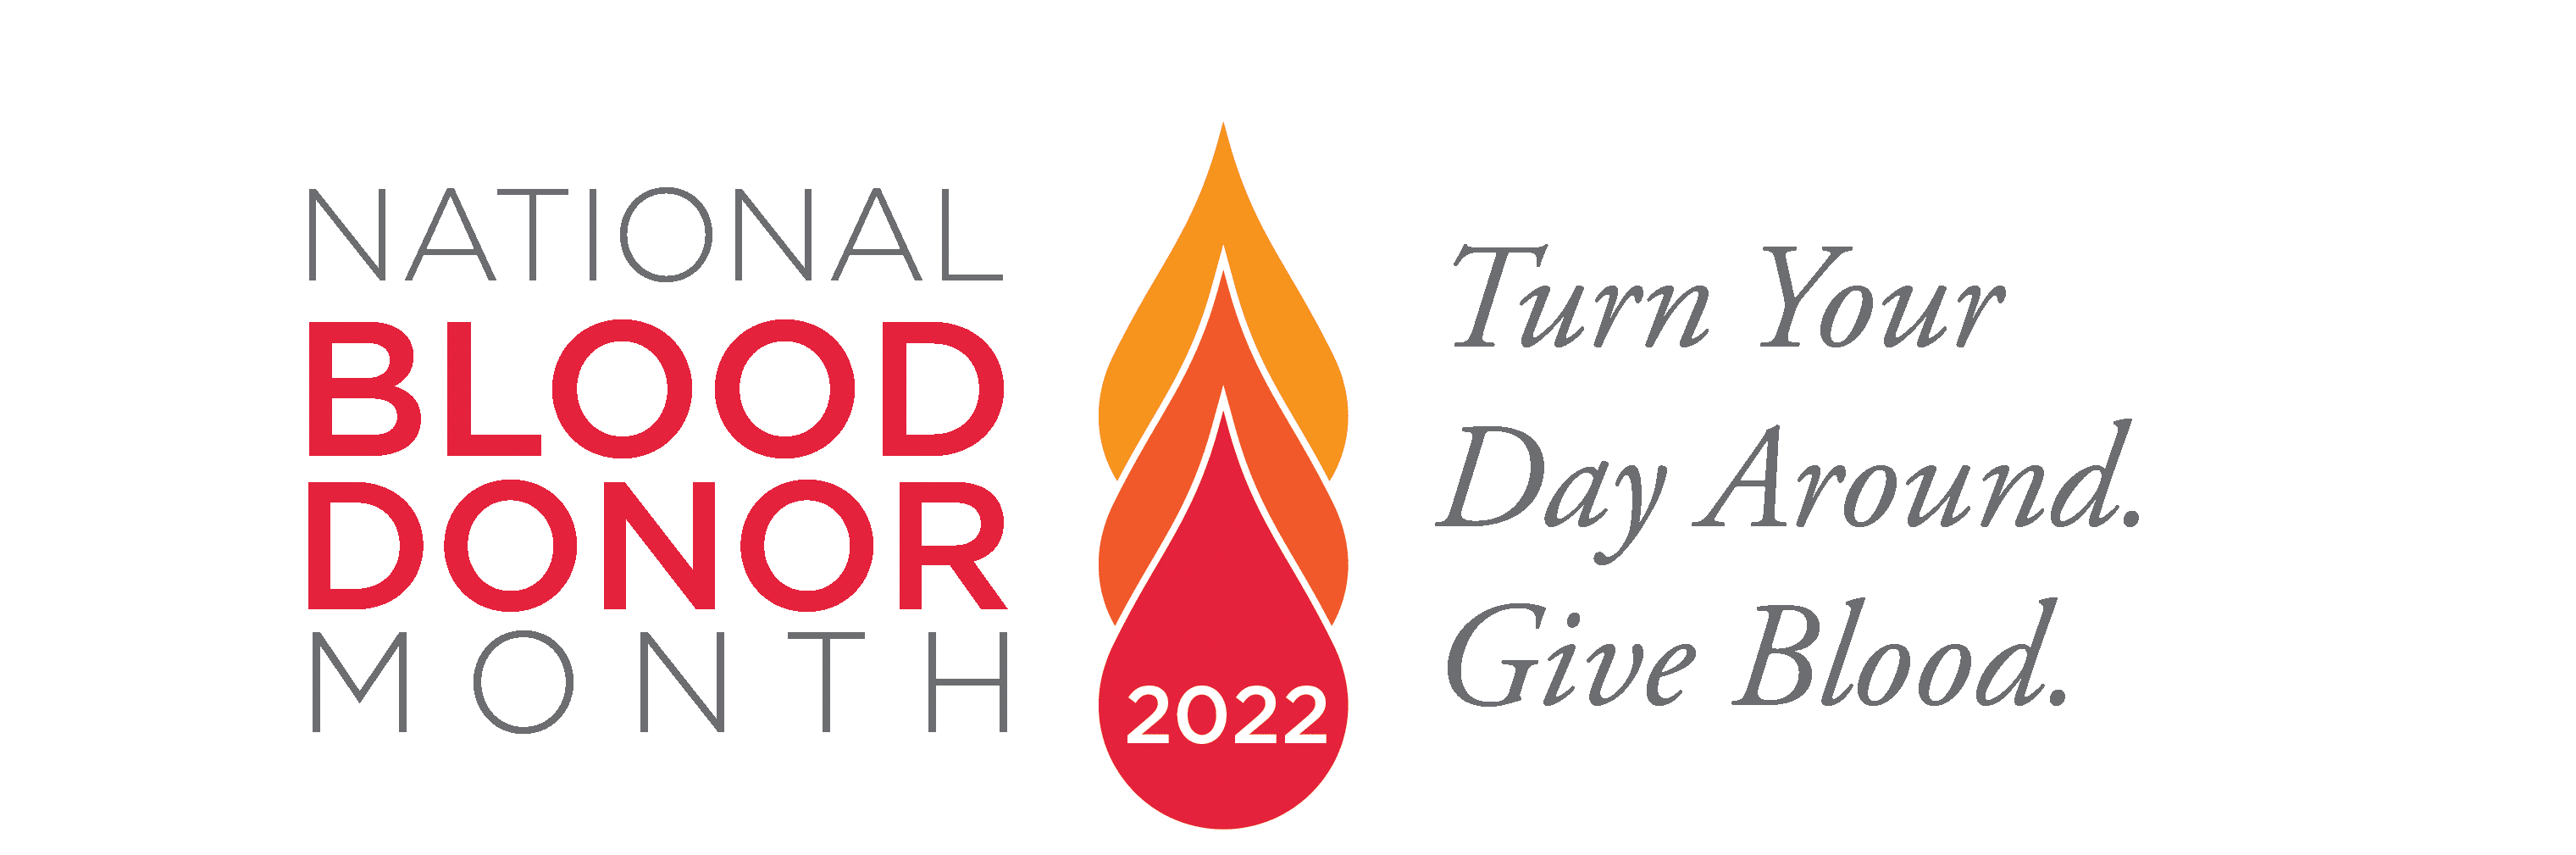 This January, resolve to ‘Turn Your Day Around’ by giving blood during National Blood Donor Month